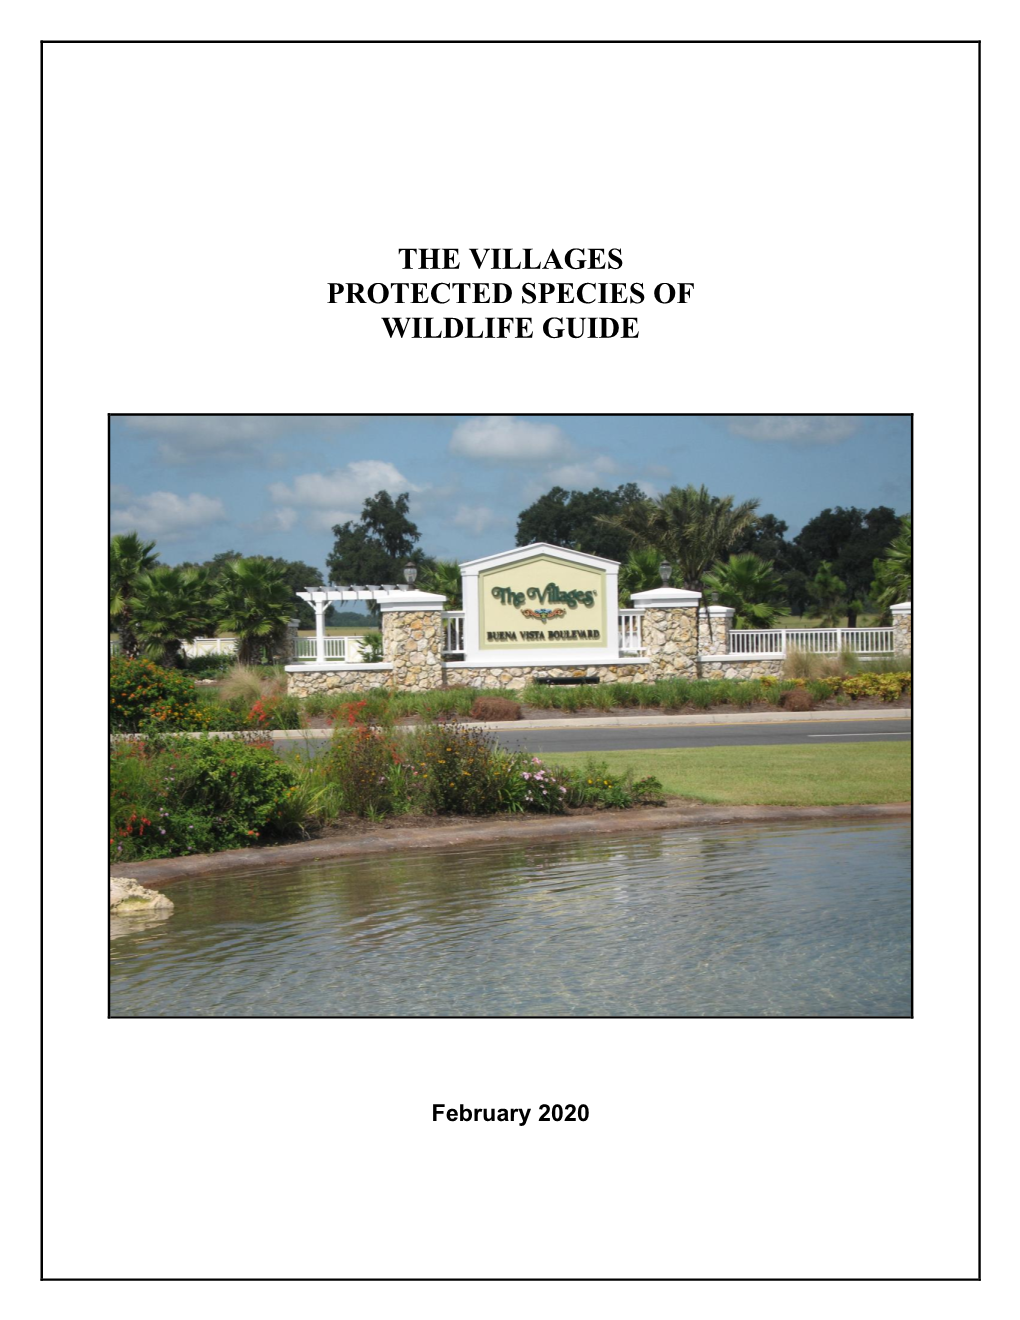 The Villages Protected Species of Wildlife Guide